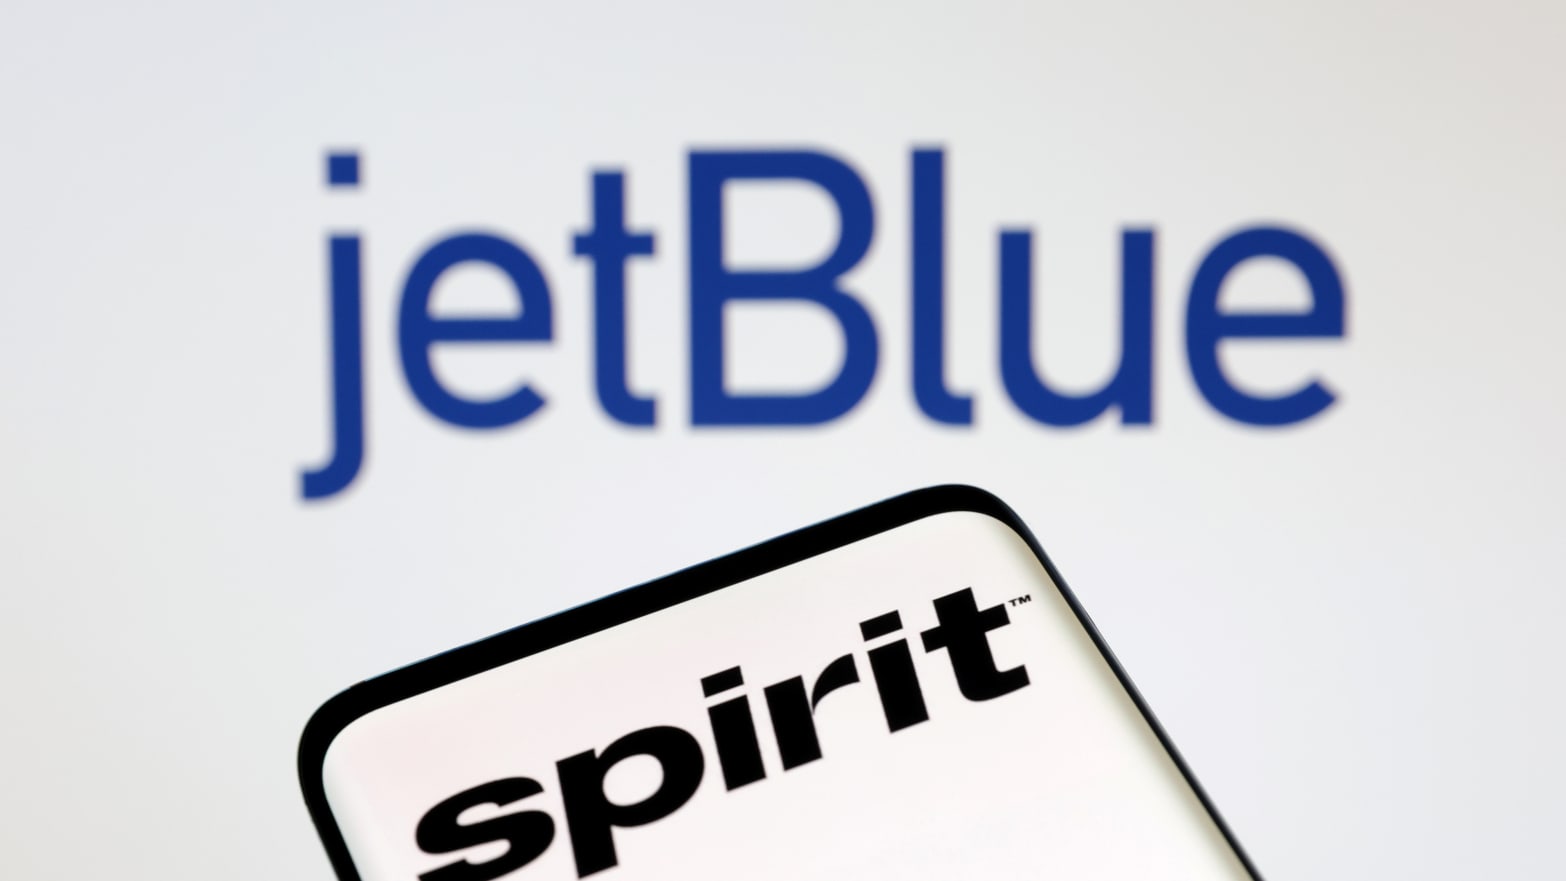 A graphic showing JetBlue and Spirit’s logos.